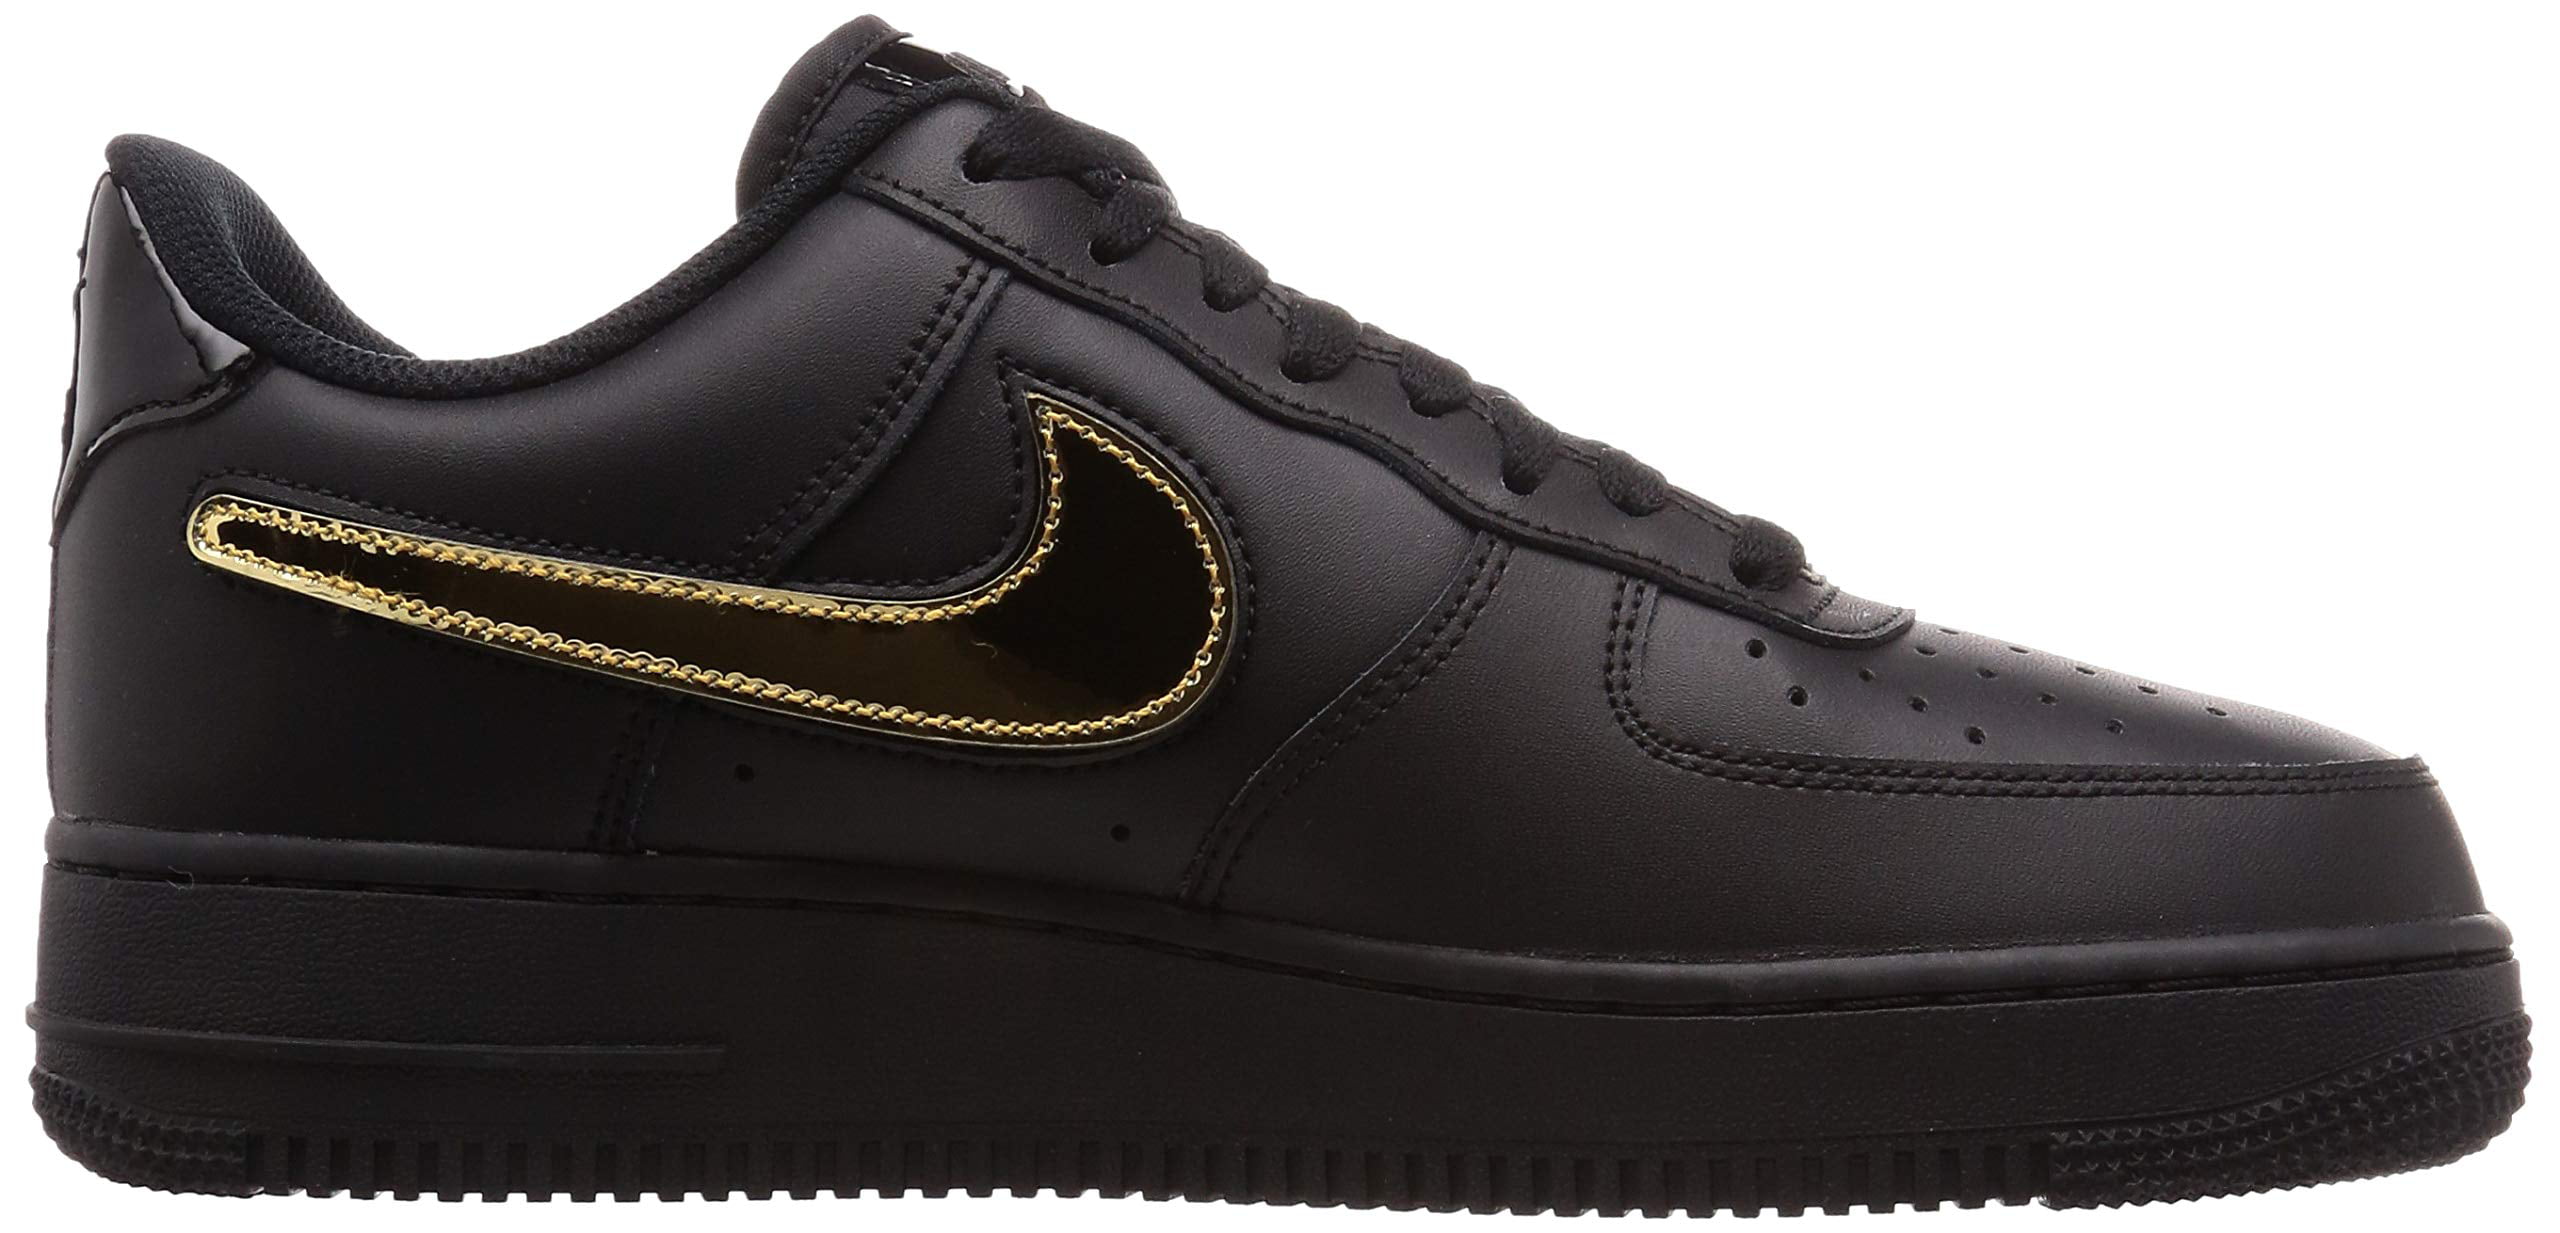 Nike Nike Air Force 1 '07 LV8 3 'Removable Swoosh' Sneakers - Farfetch